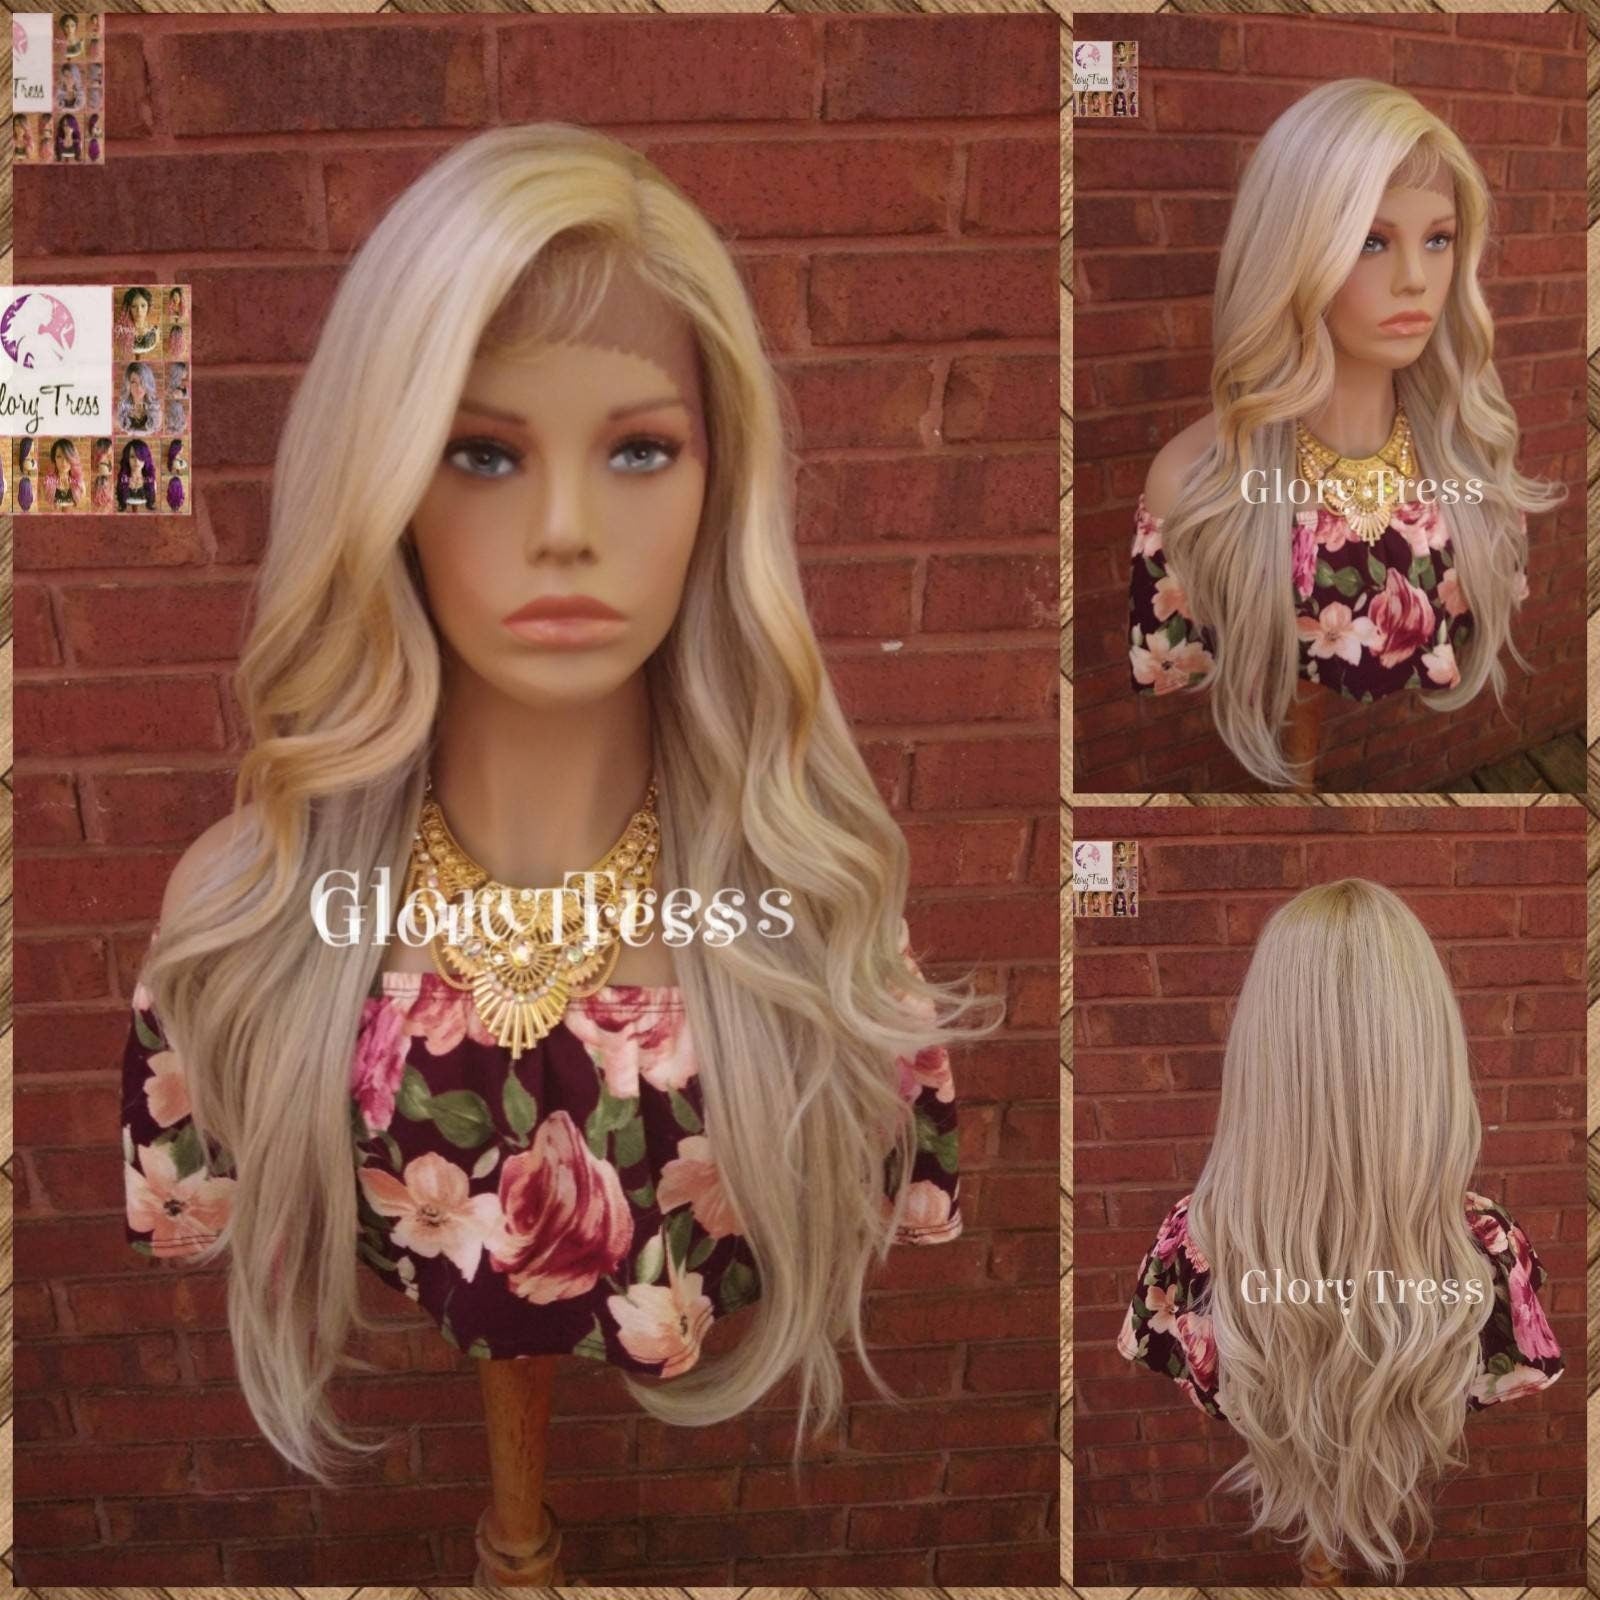 Wavy Lace Front Wig, Ombre Ash Blonde Wig, Blonde Wig, Glory Tress Wigs, Wigs, Wig, Heat Safe, ON SALE  // AMAZING